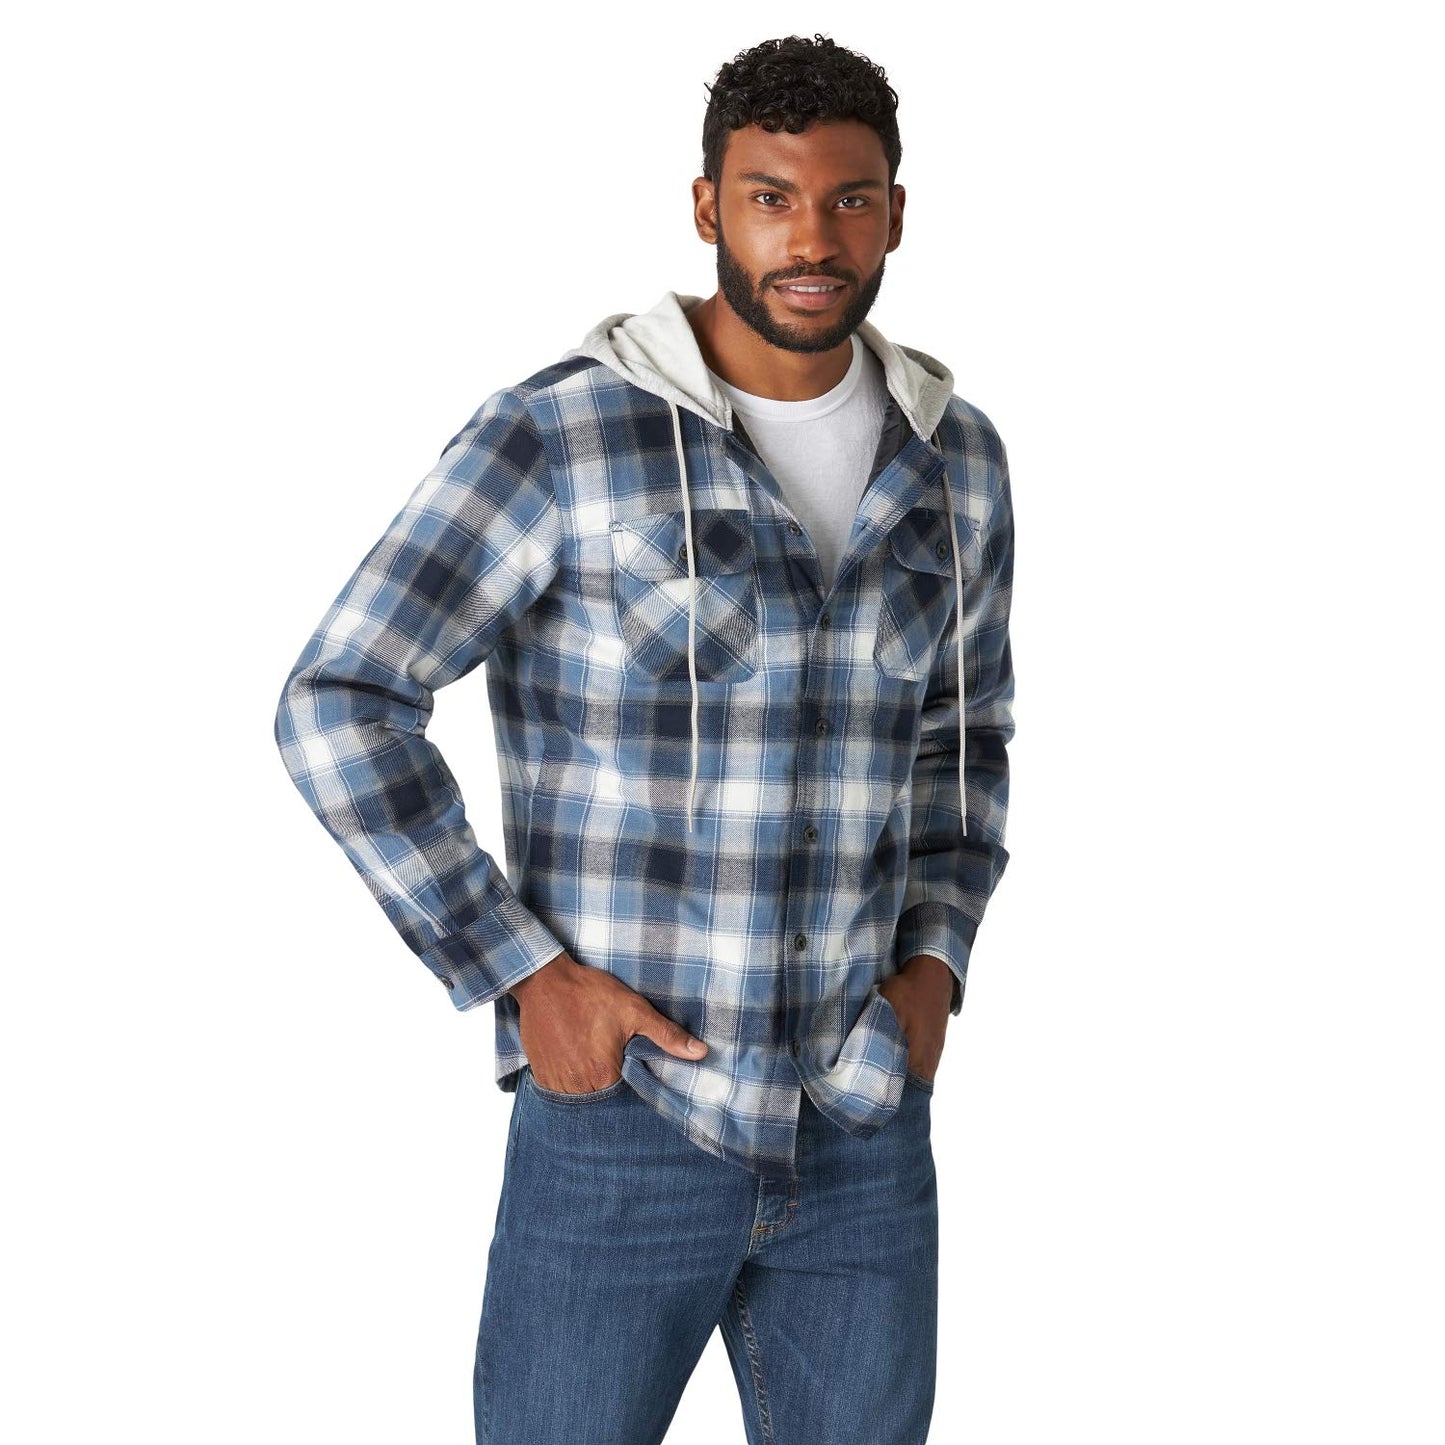 Wrangler Authentics Men's Long Sleeve Quilted Lined Flannel Shirt Jacket with Hood, Blue/Black, X-Large